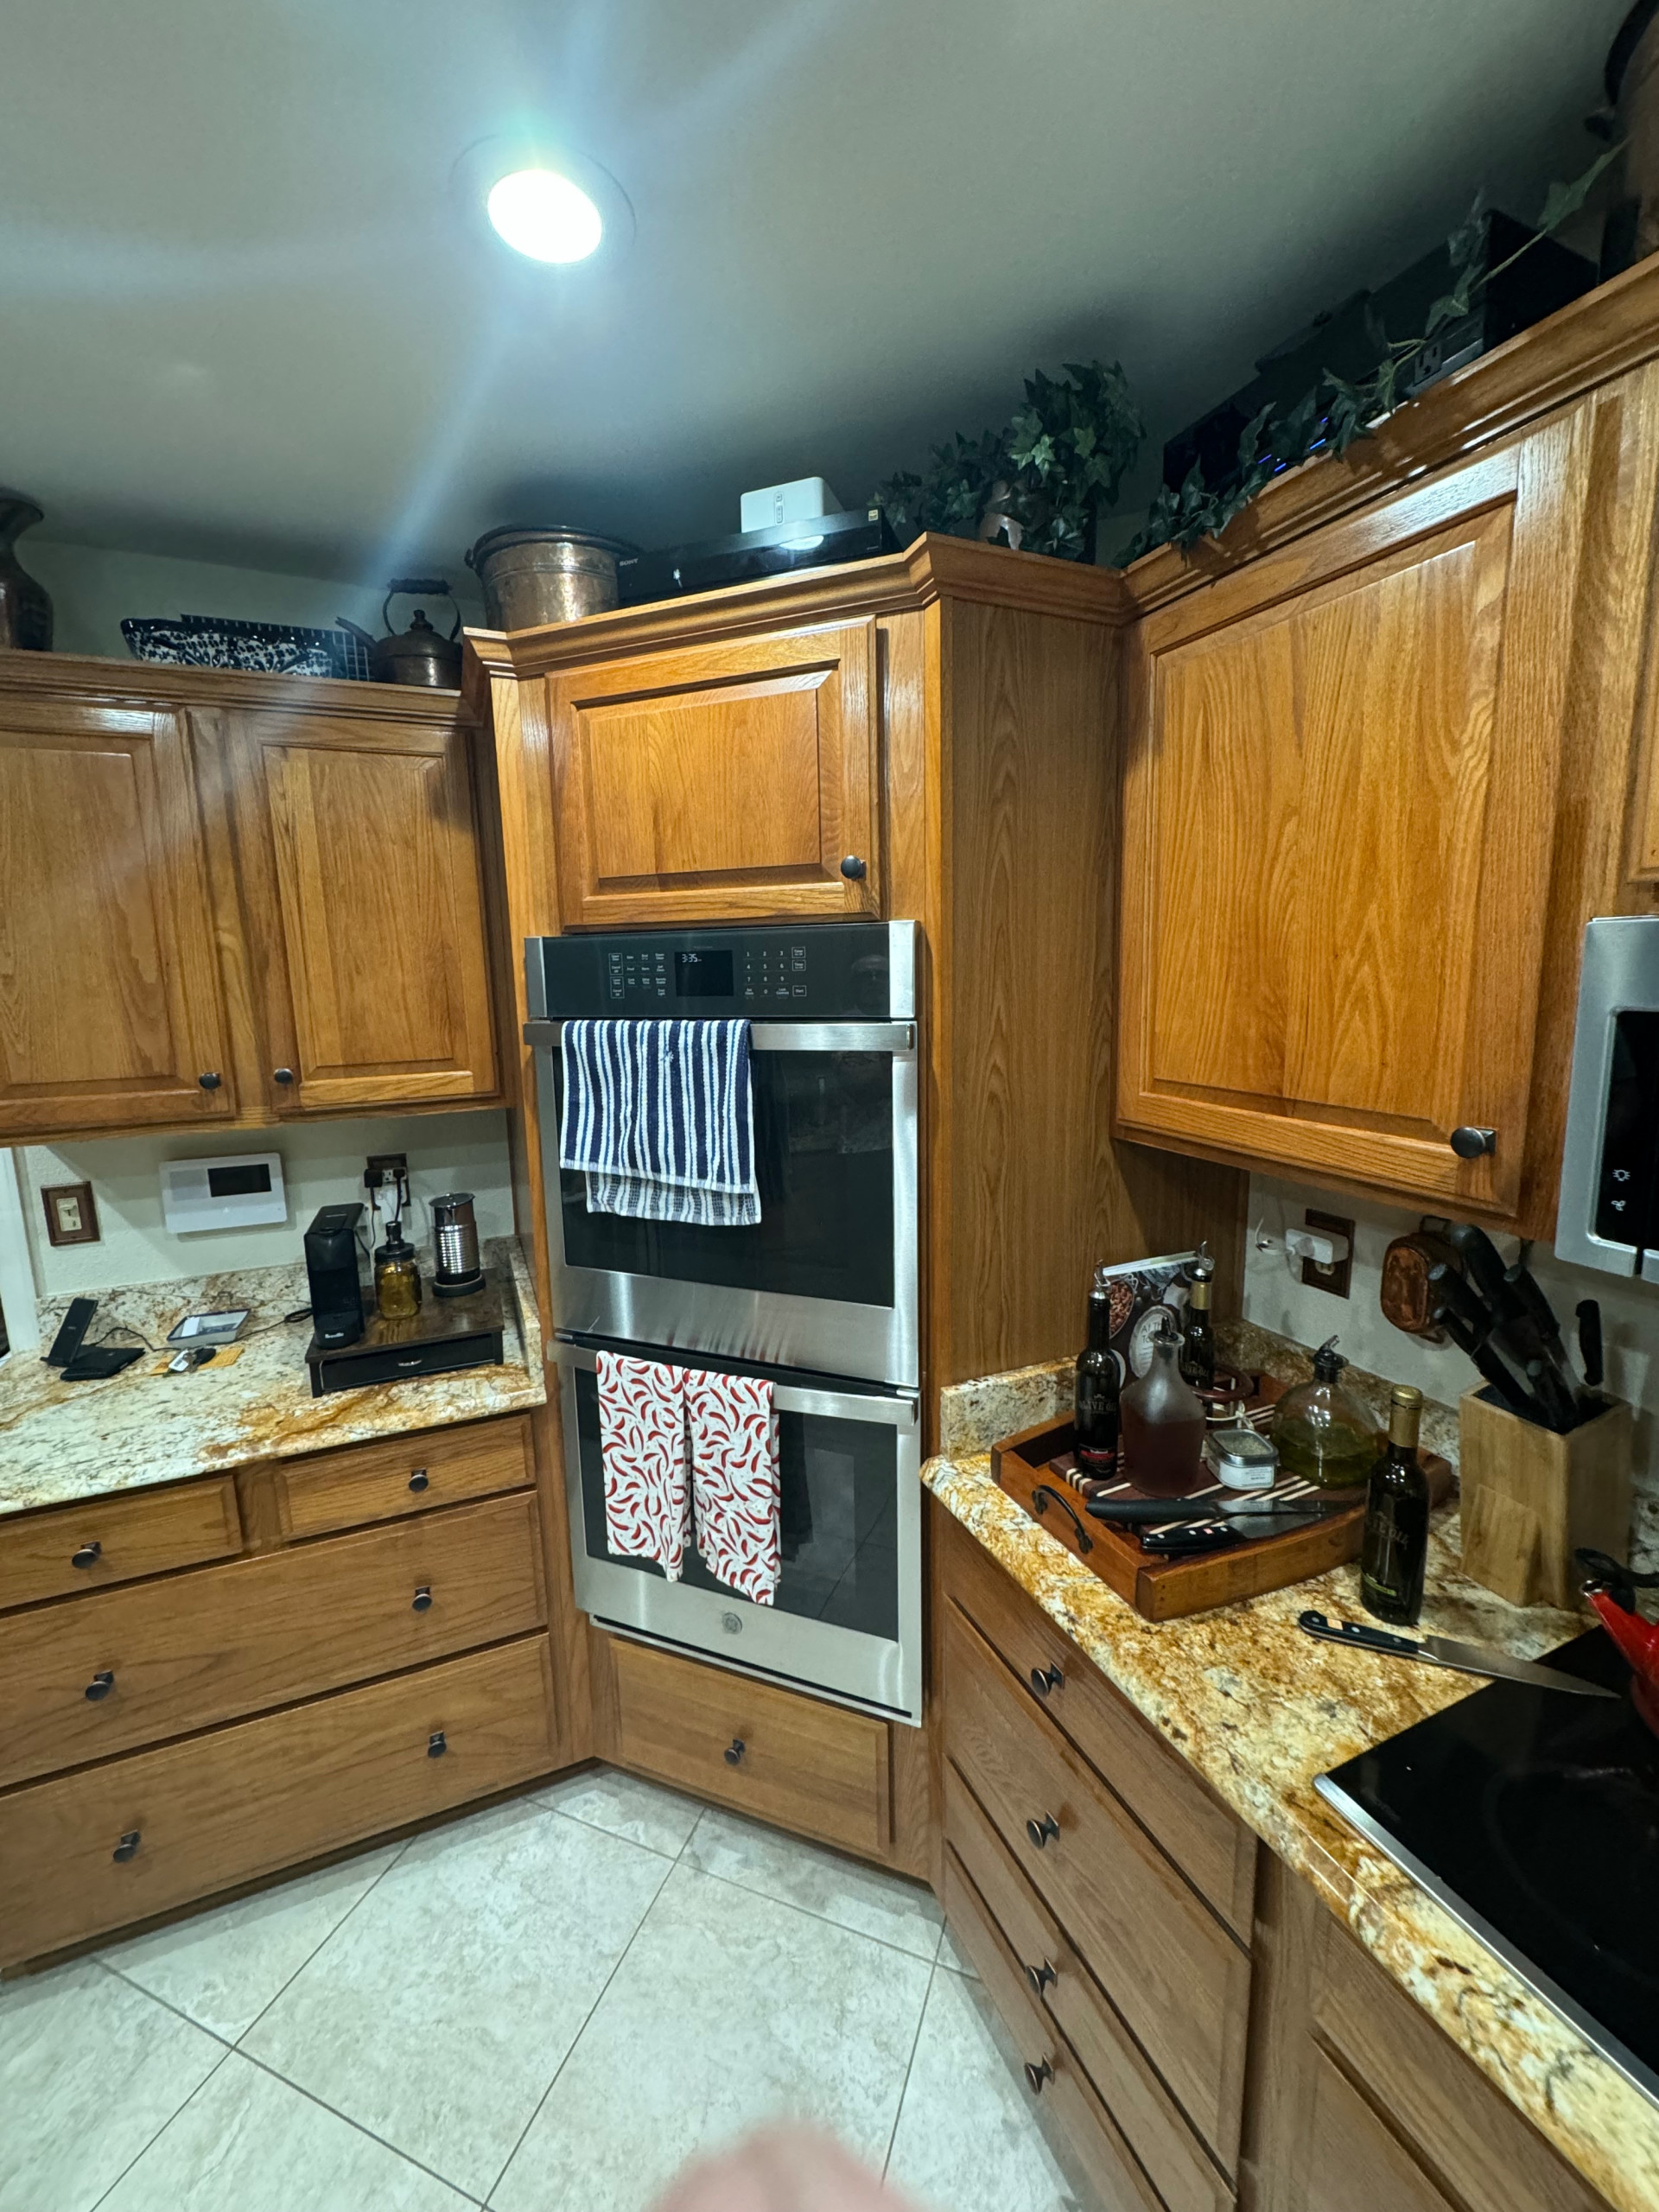 Kitchen and Bathroom Reface with Partial Build